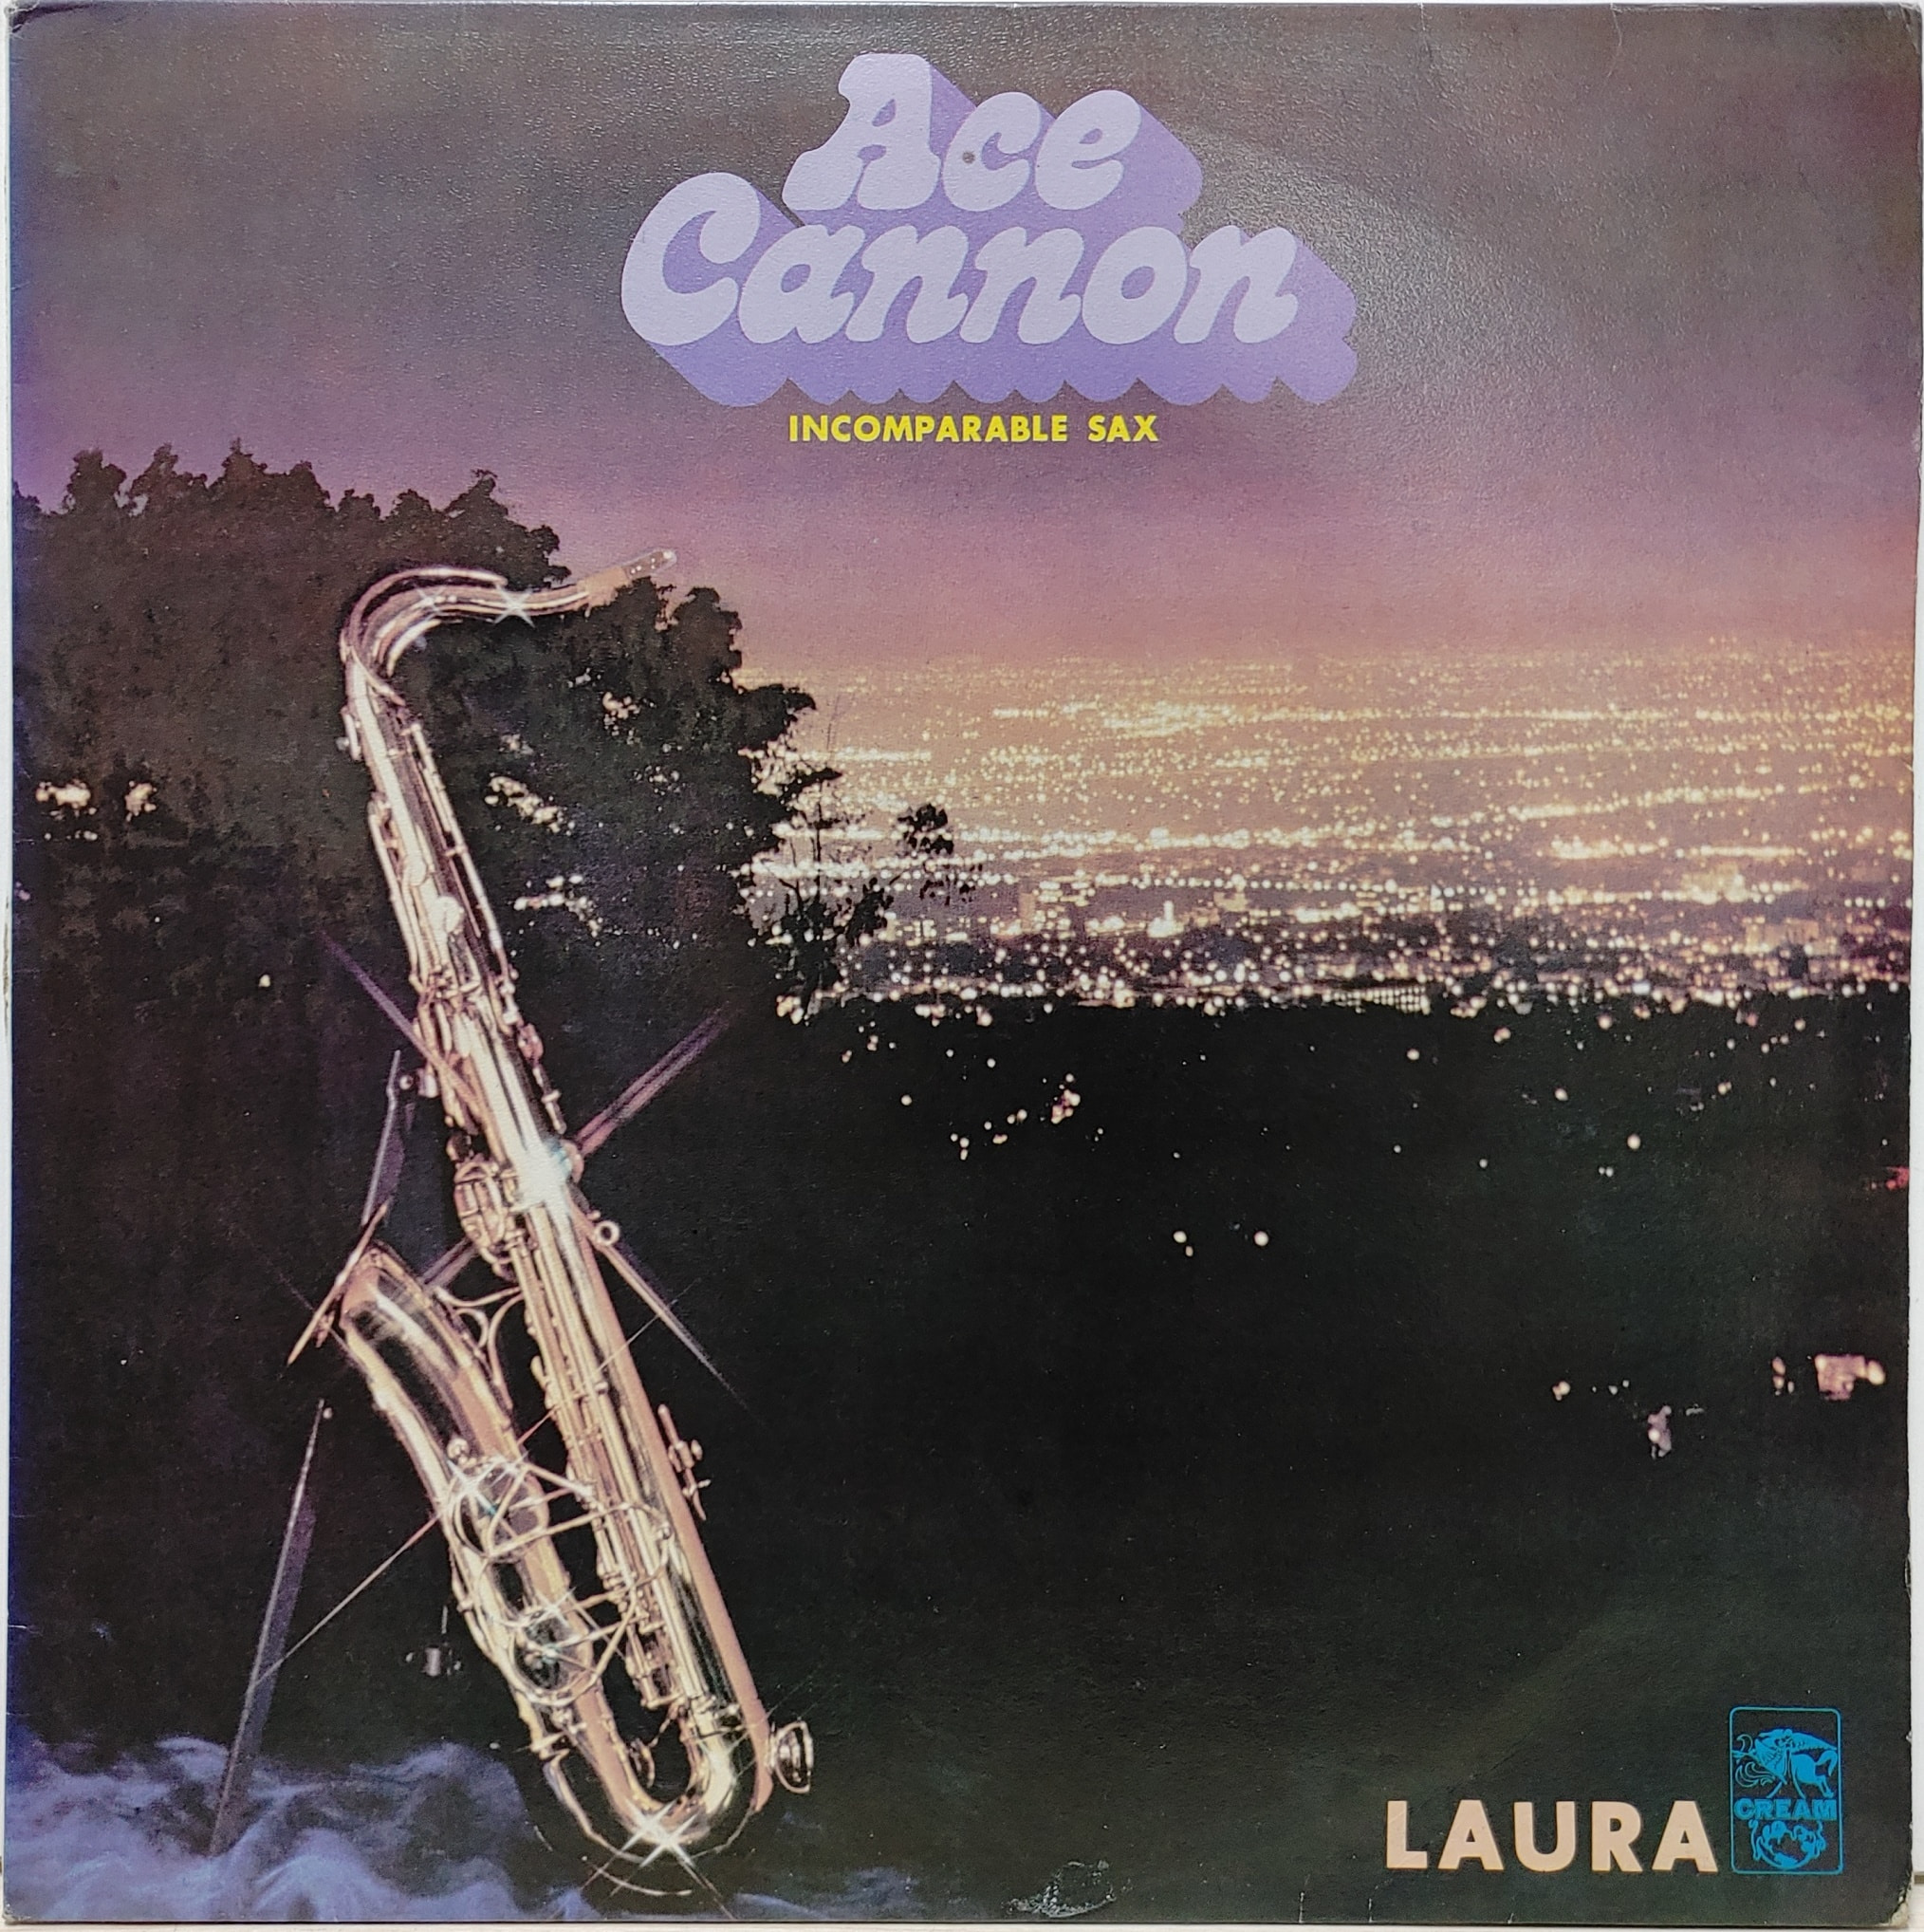 ACE CANNON INCOMPARABLE SAX / LAURA